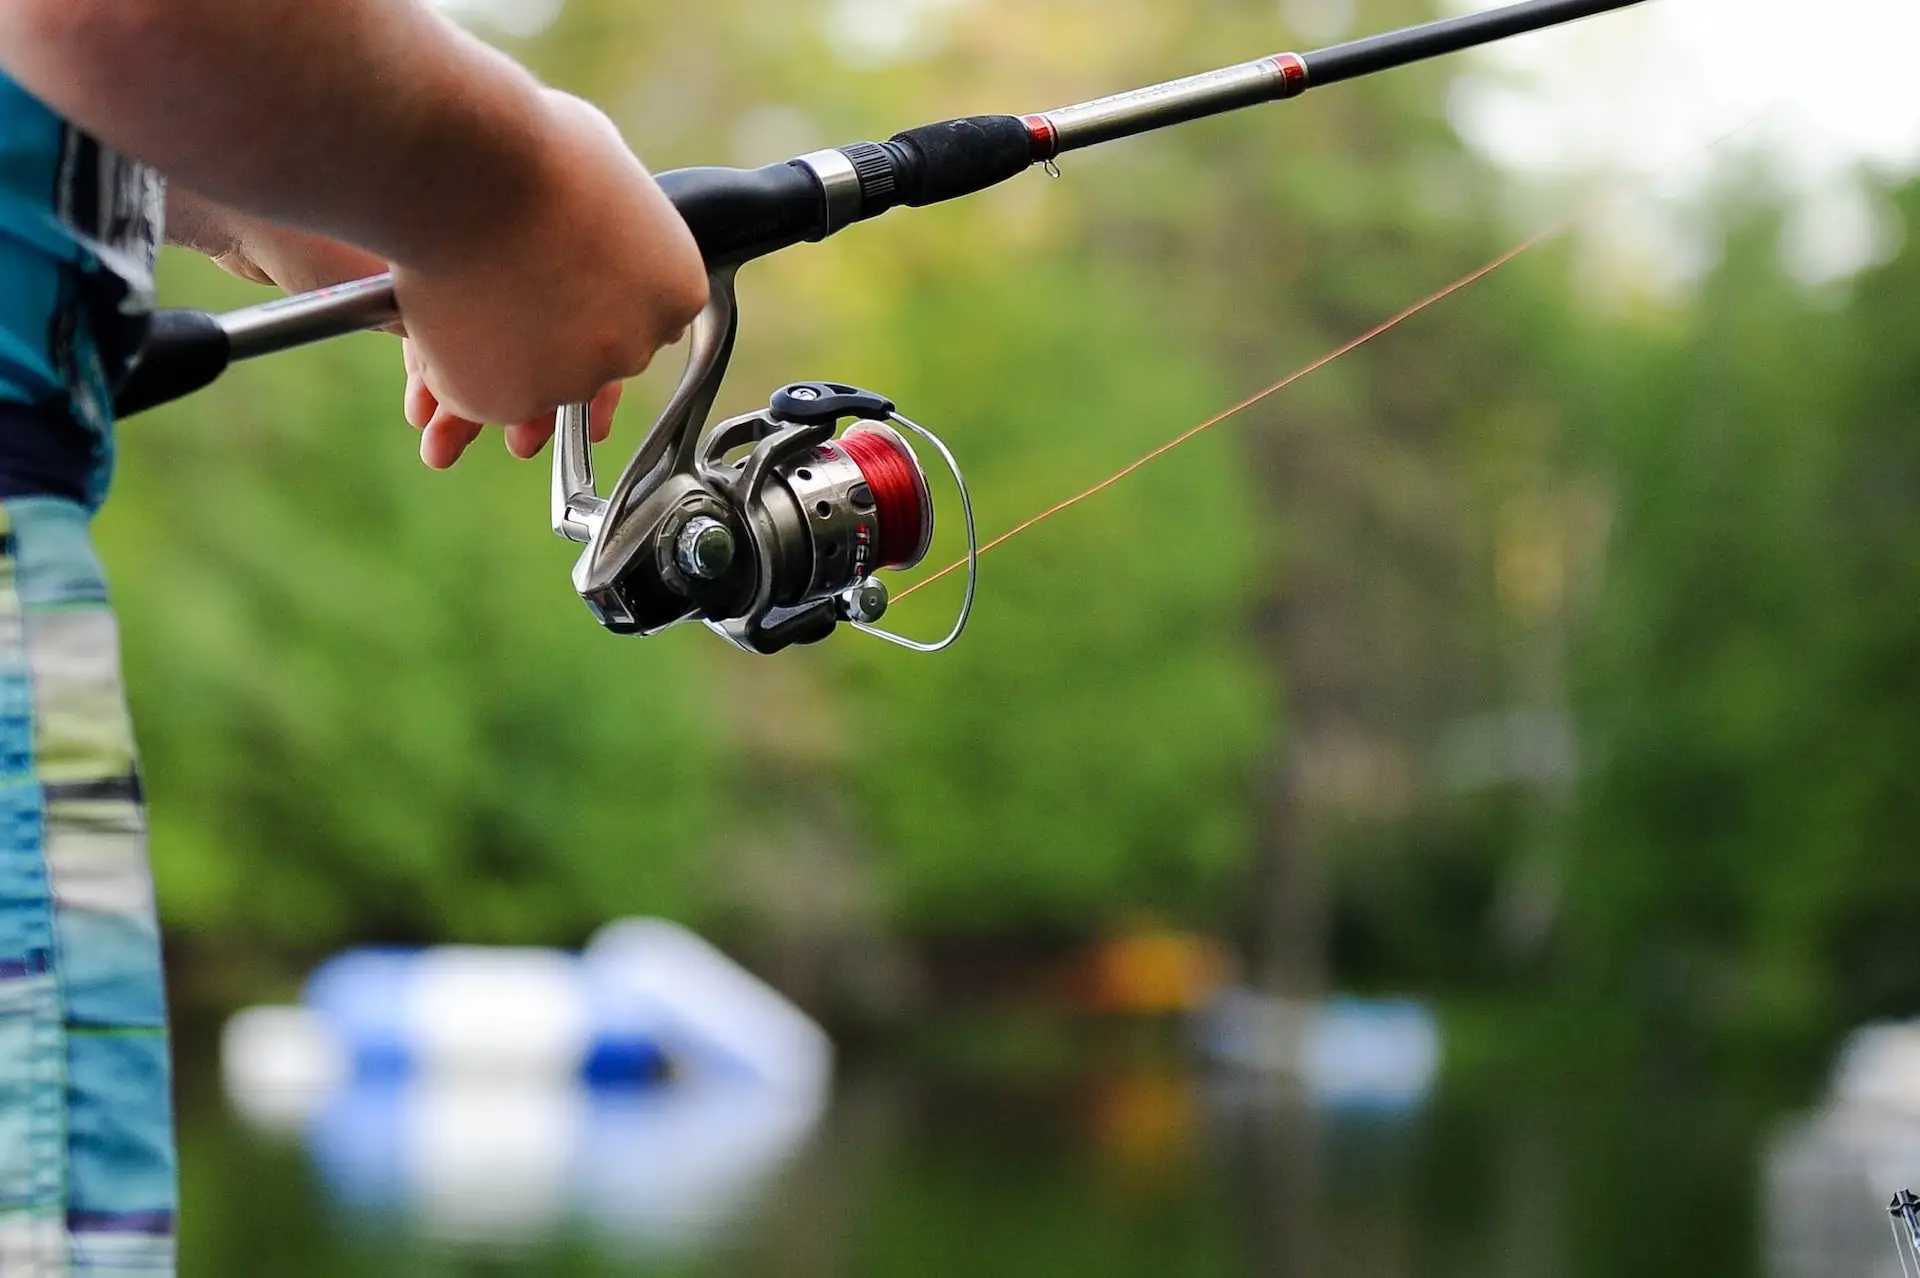 shop rods and reels, spinning rods, freshwater fishing pros